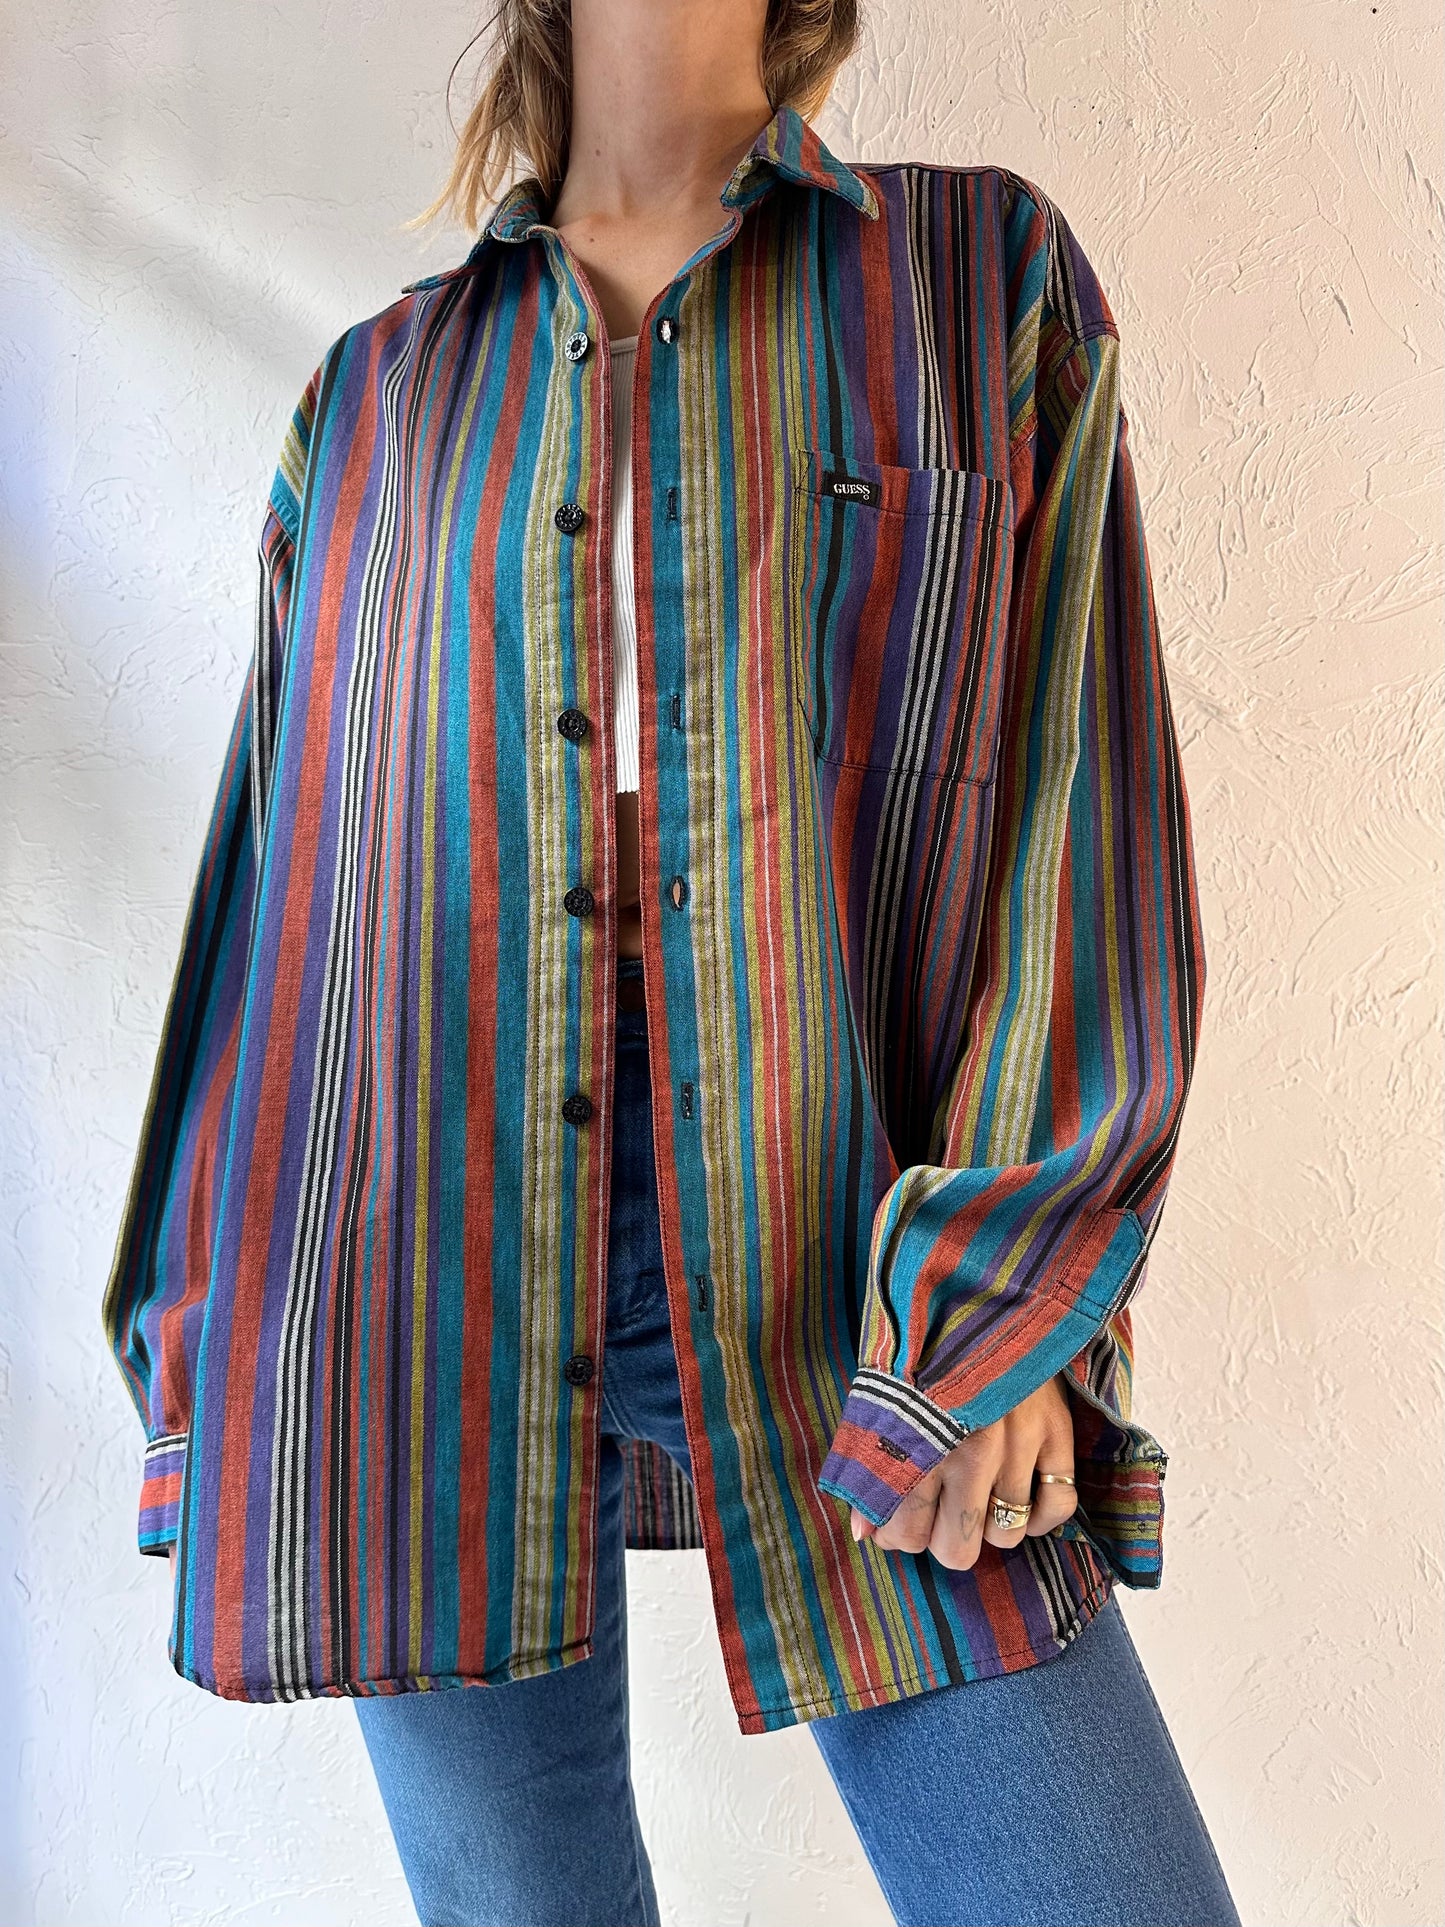 90s 'Guess' Striped Oxford / Large